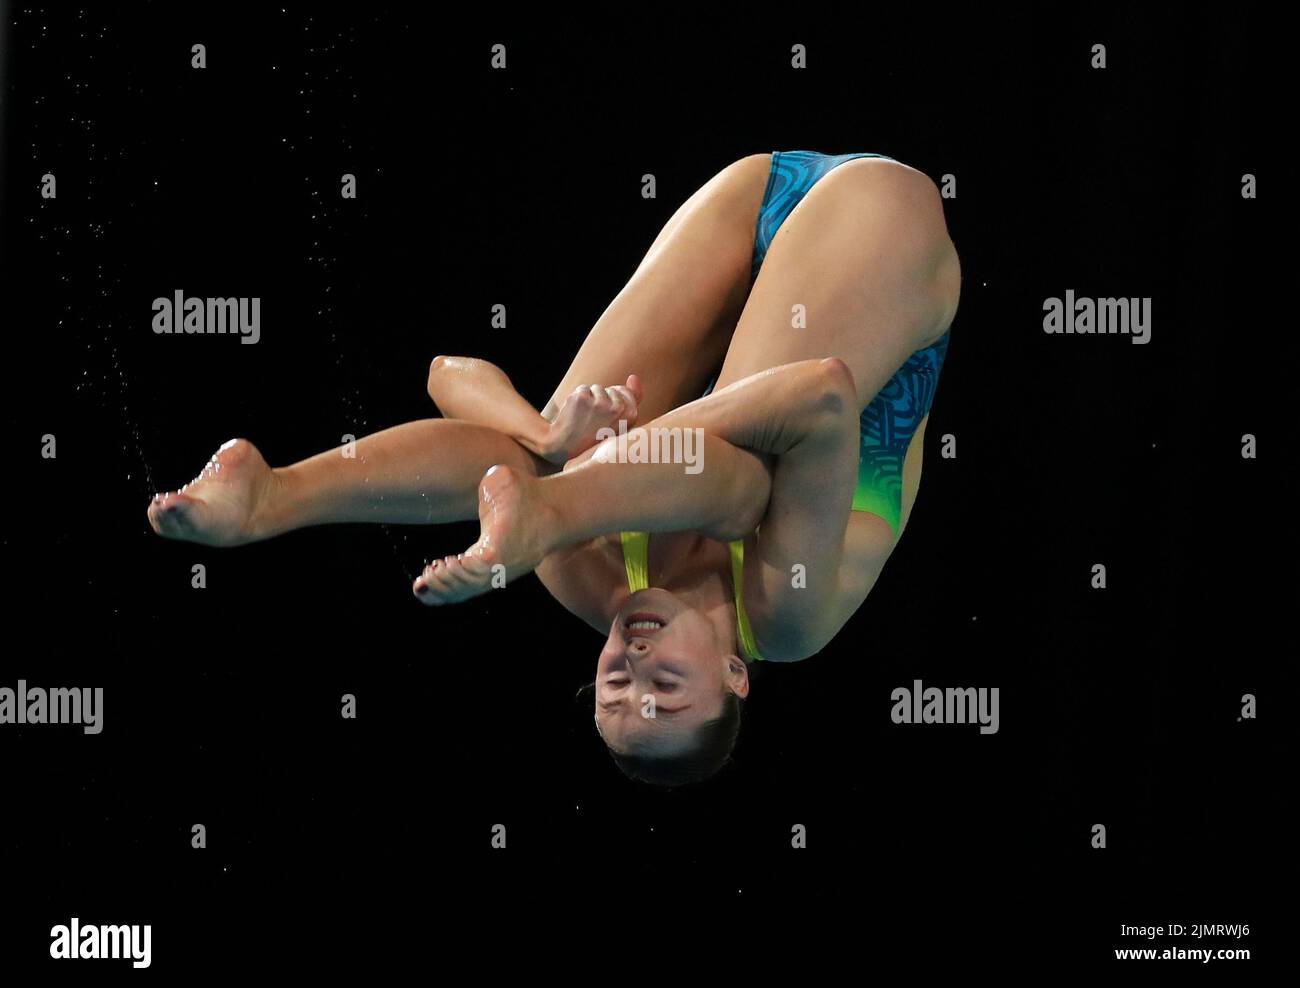 Australia’s Georgia Rae Leslie Sheehan in action during the Women’s 3m Springboard Final at Sandwell Aquatics Centre on day ten of the 2022 Commonwealth Games in Birmingham. Picture date: Sunday August 7, 2022. Stock Photo